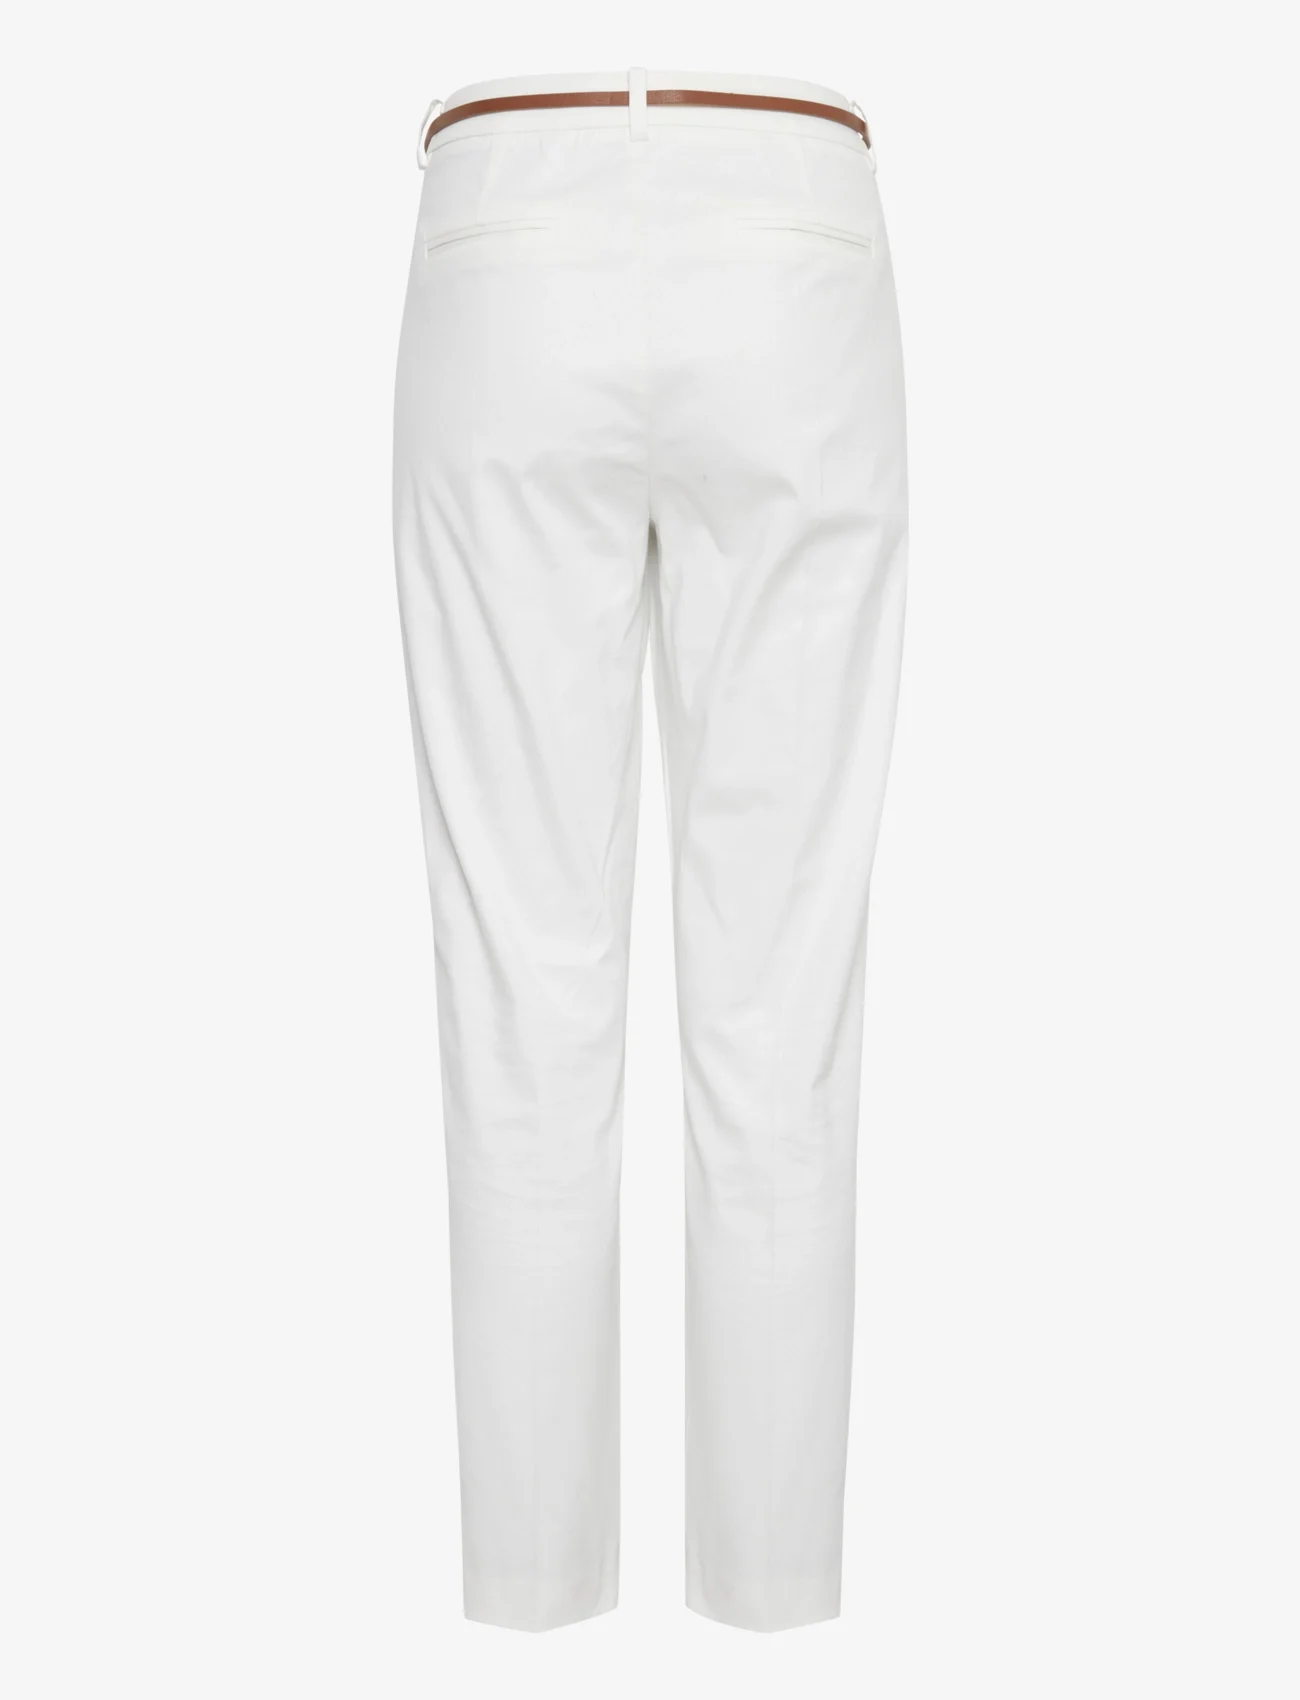 b.young - BYDAYS CIGARET PANTS 2 - - festmode zu outlet-preisen - off white - 1